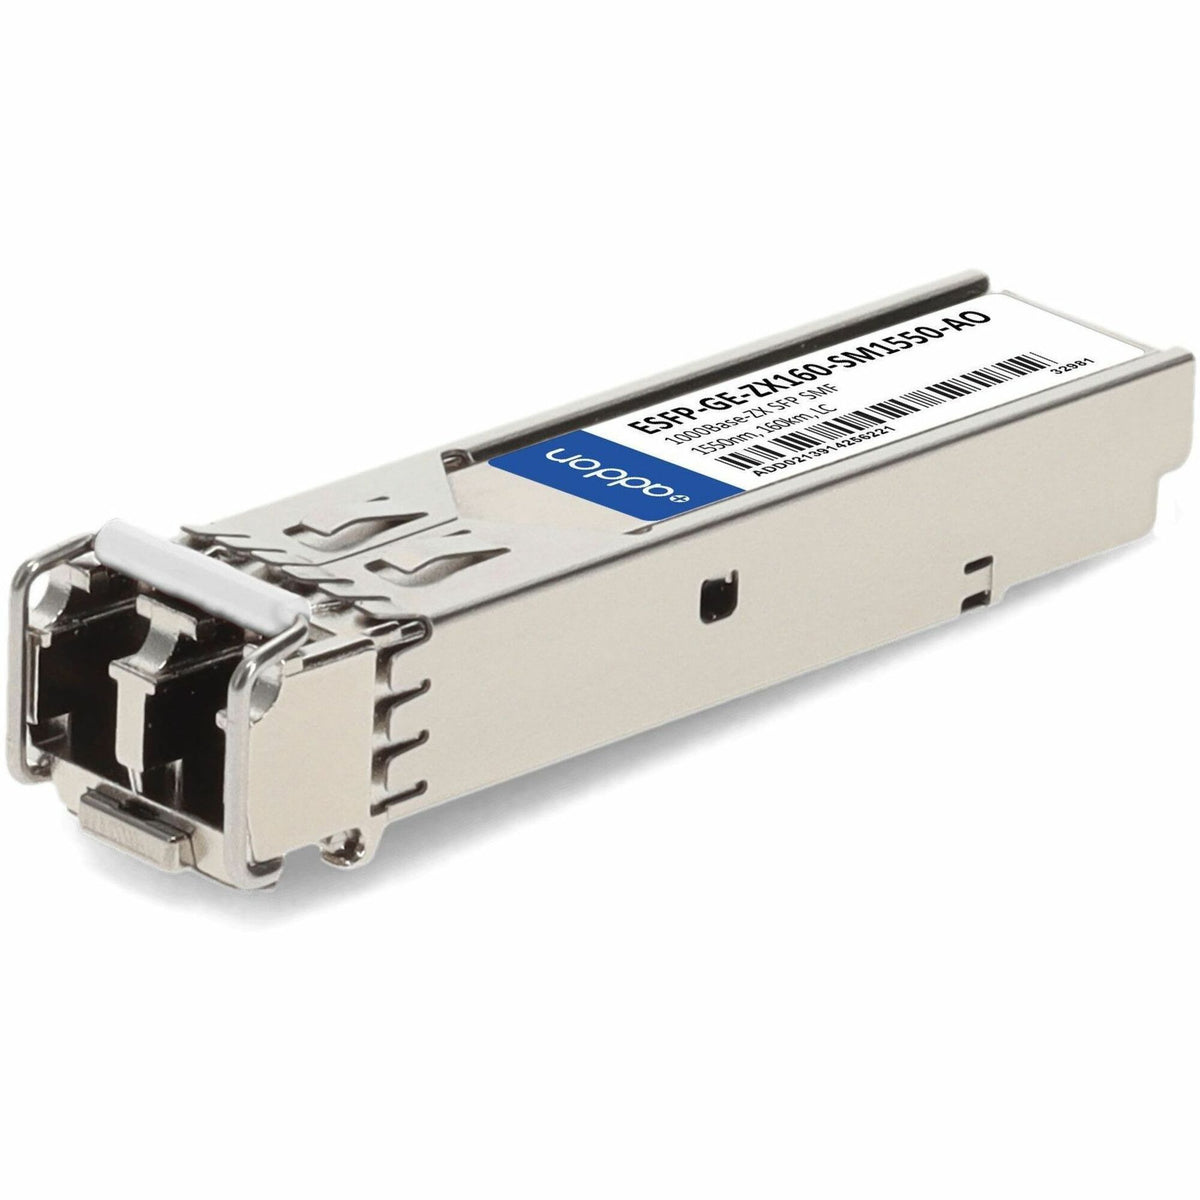 AddOn Huawei ESFP-GE-ZX160-SM1550 Compatible TAA Compliant 1000Base-ZX SFP Transceiver (SMF, 1550nm, 160km, LC) - ESFP-GE-ZX160-SM1550-AO